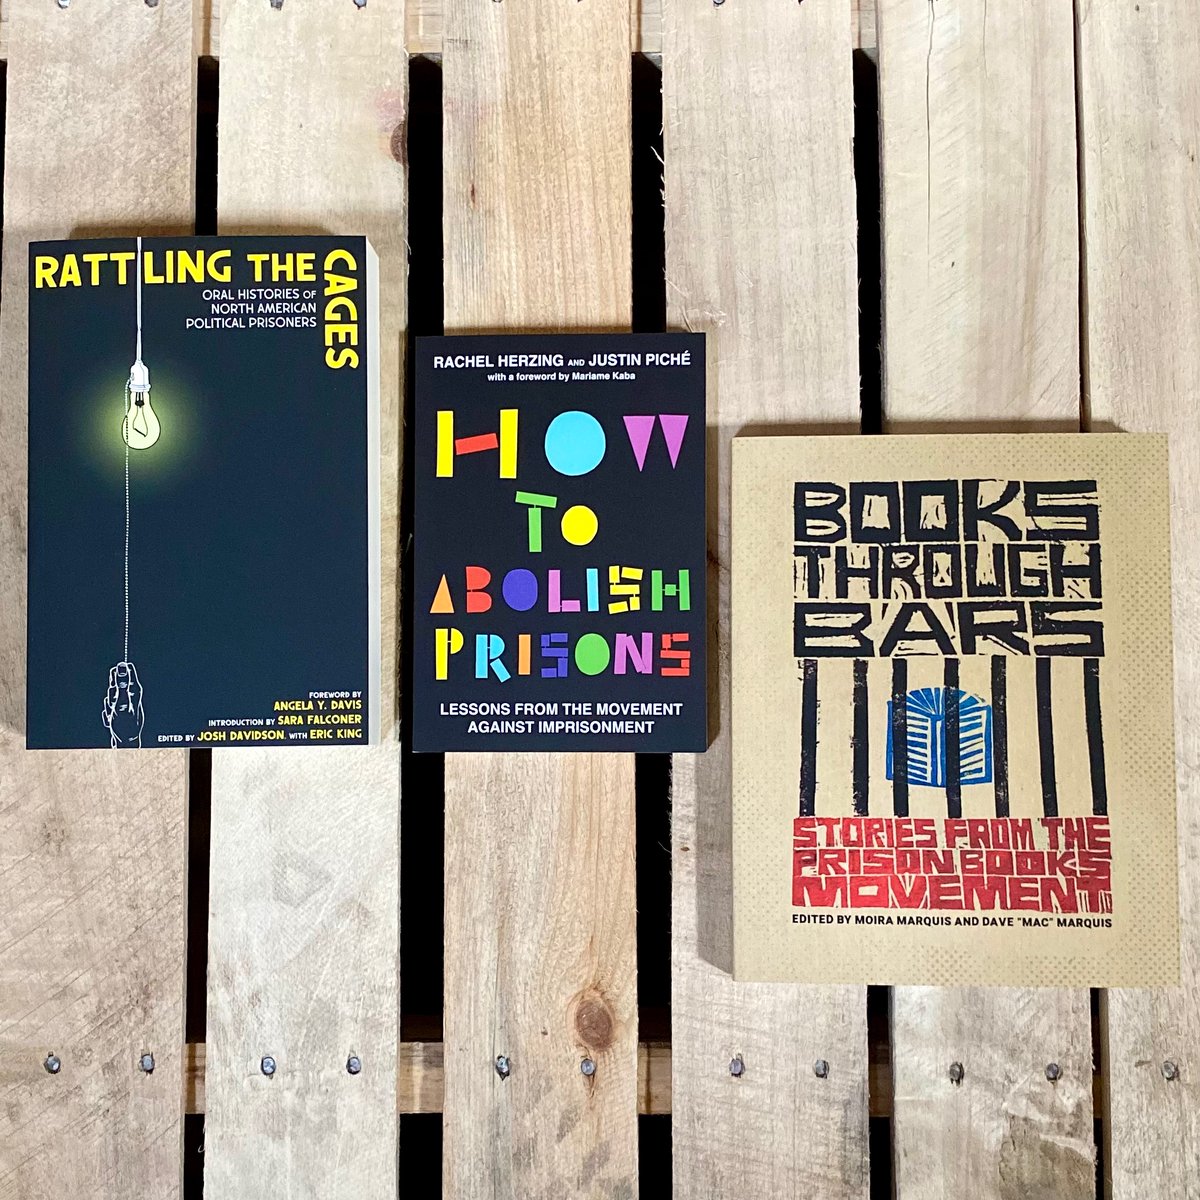 Check out these recent books—and many more we carry on prisons, policing, and abolition—to learn from the stories of incarcerated people and from the movement to abolish prisons: akpress.org/products.html?…